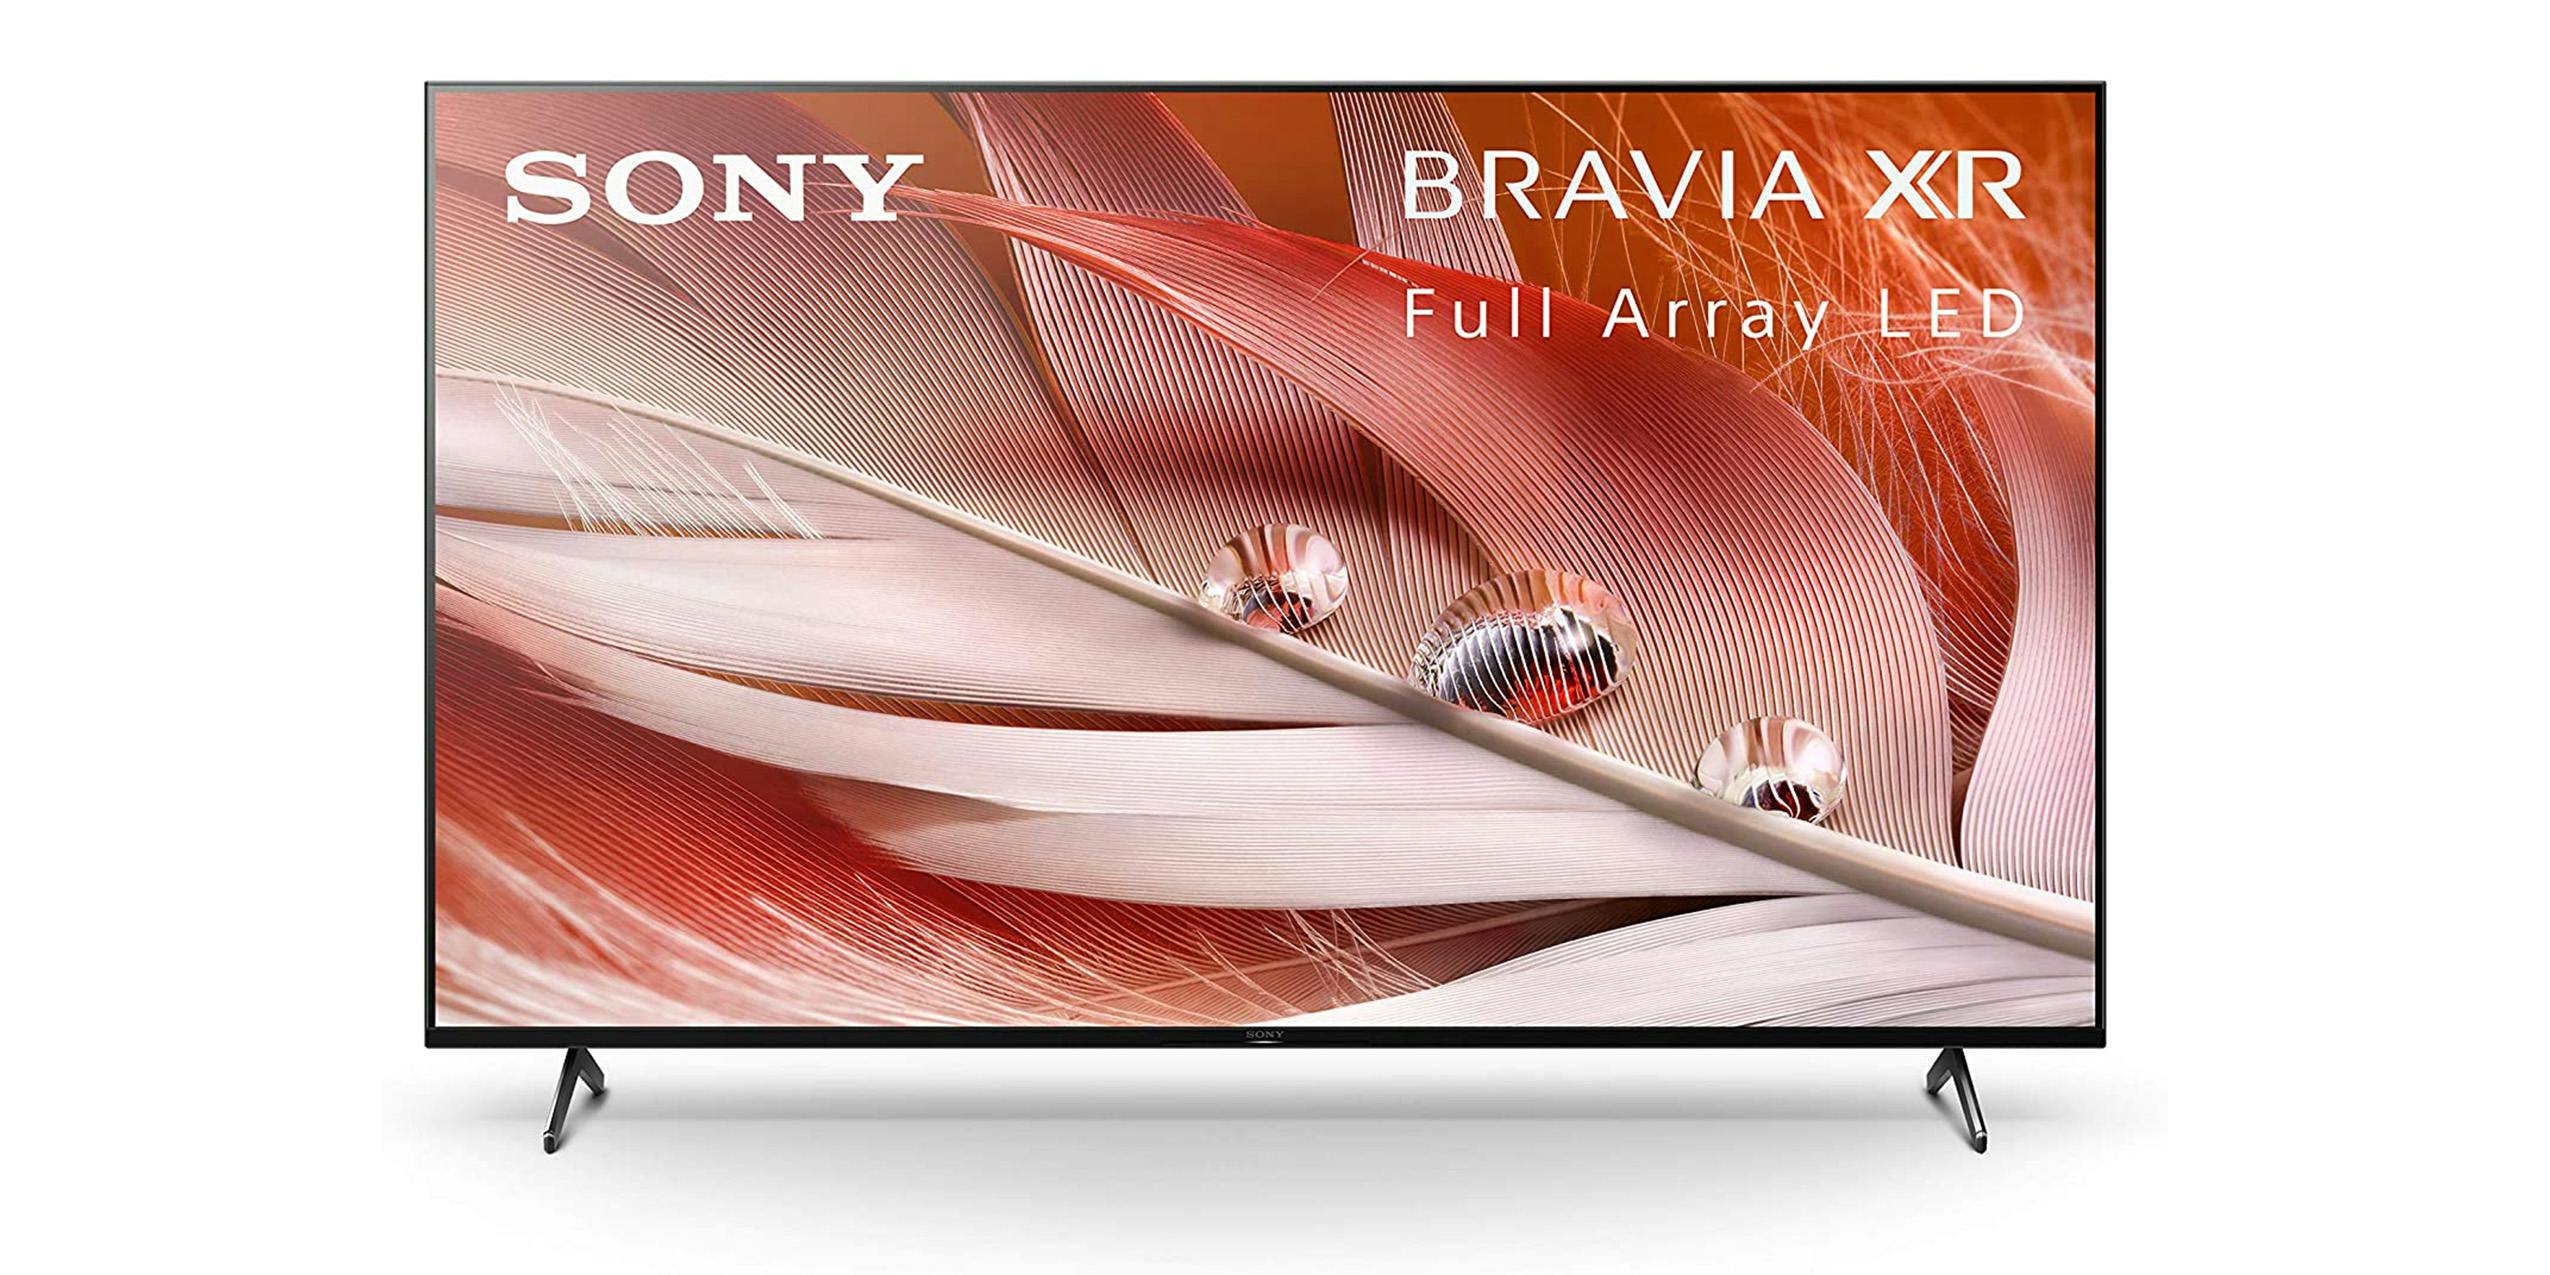 Sony Bravia XR Full Array LED TV is one of the most expensive gift ideas for moms.